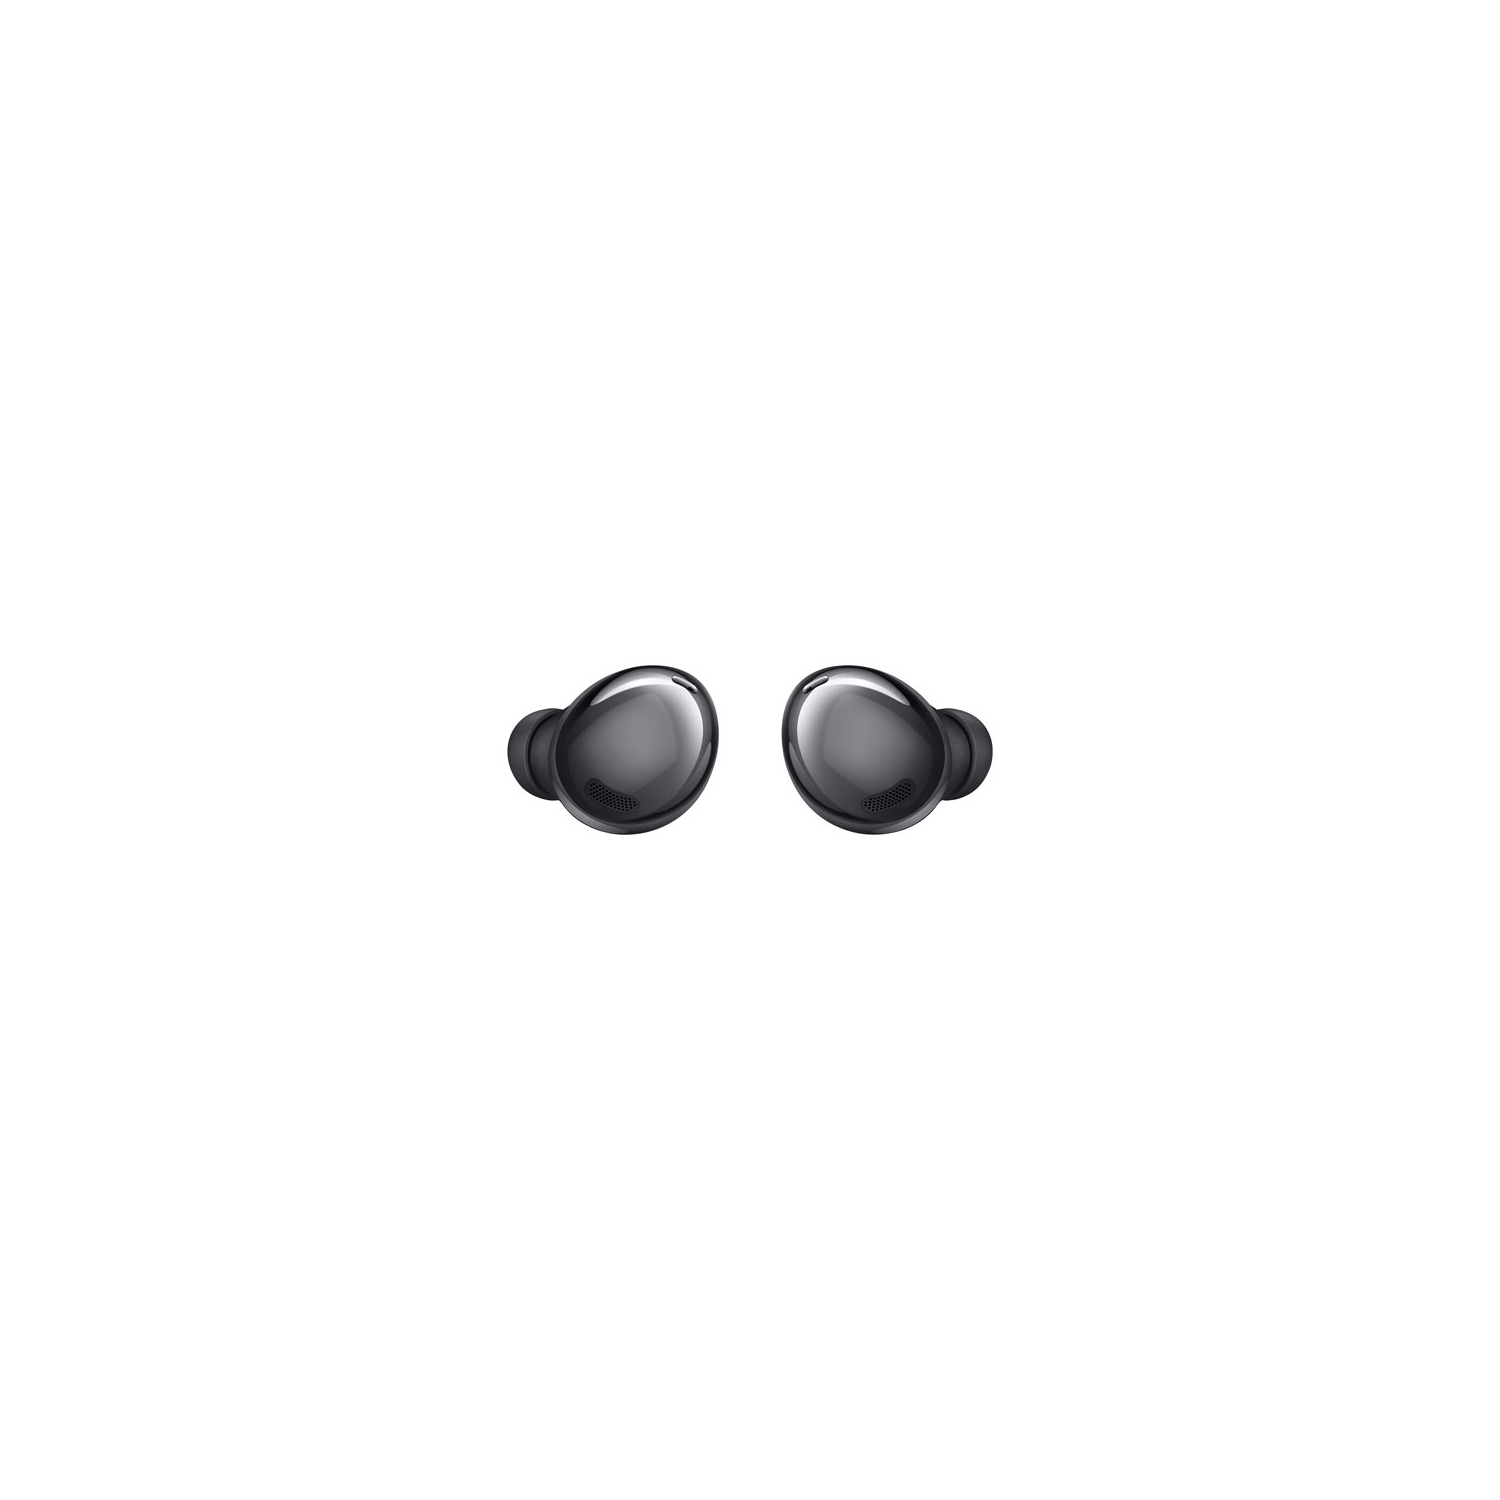 Refurbished (Excellent) - Samsung Galaxy Buds Pro In-Ear Noise Cancelling True Wireless Earbuds - Phantom Black